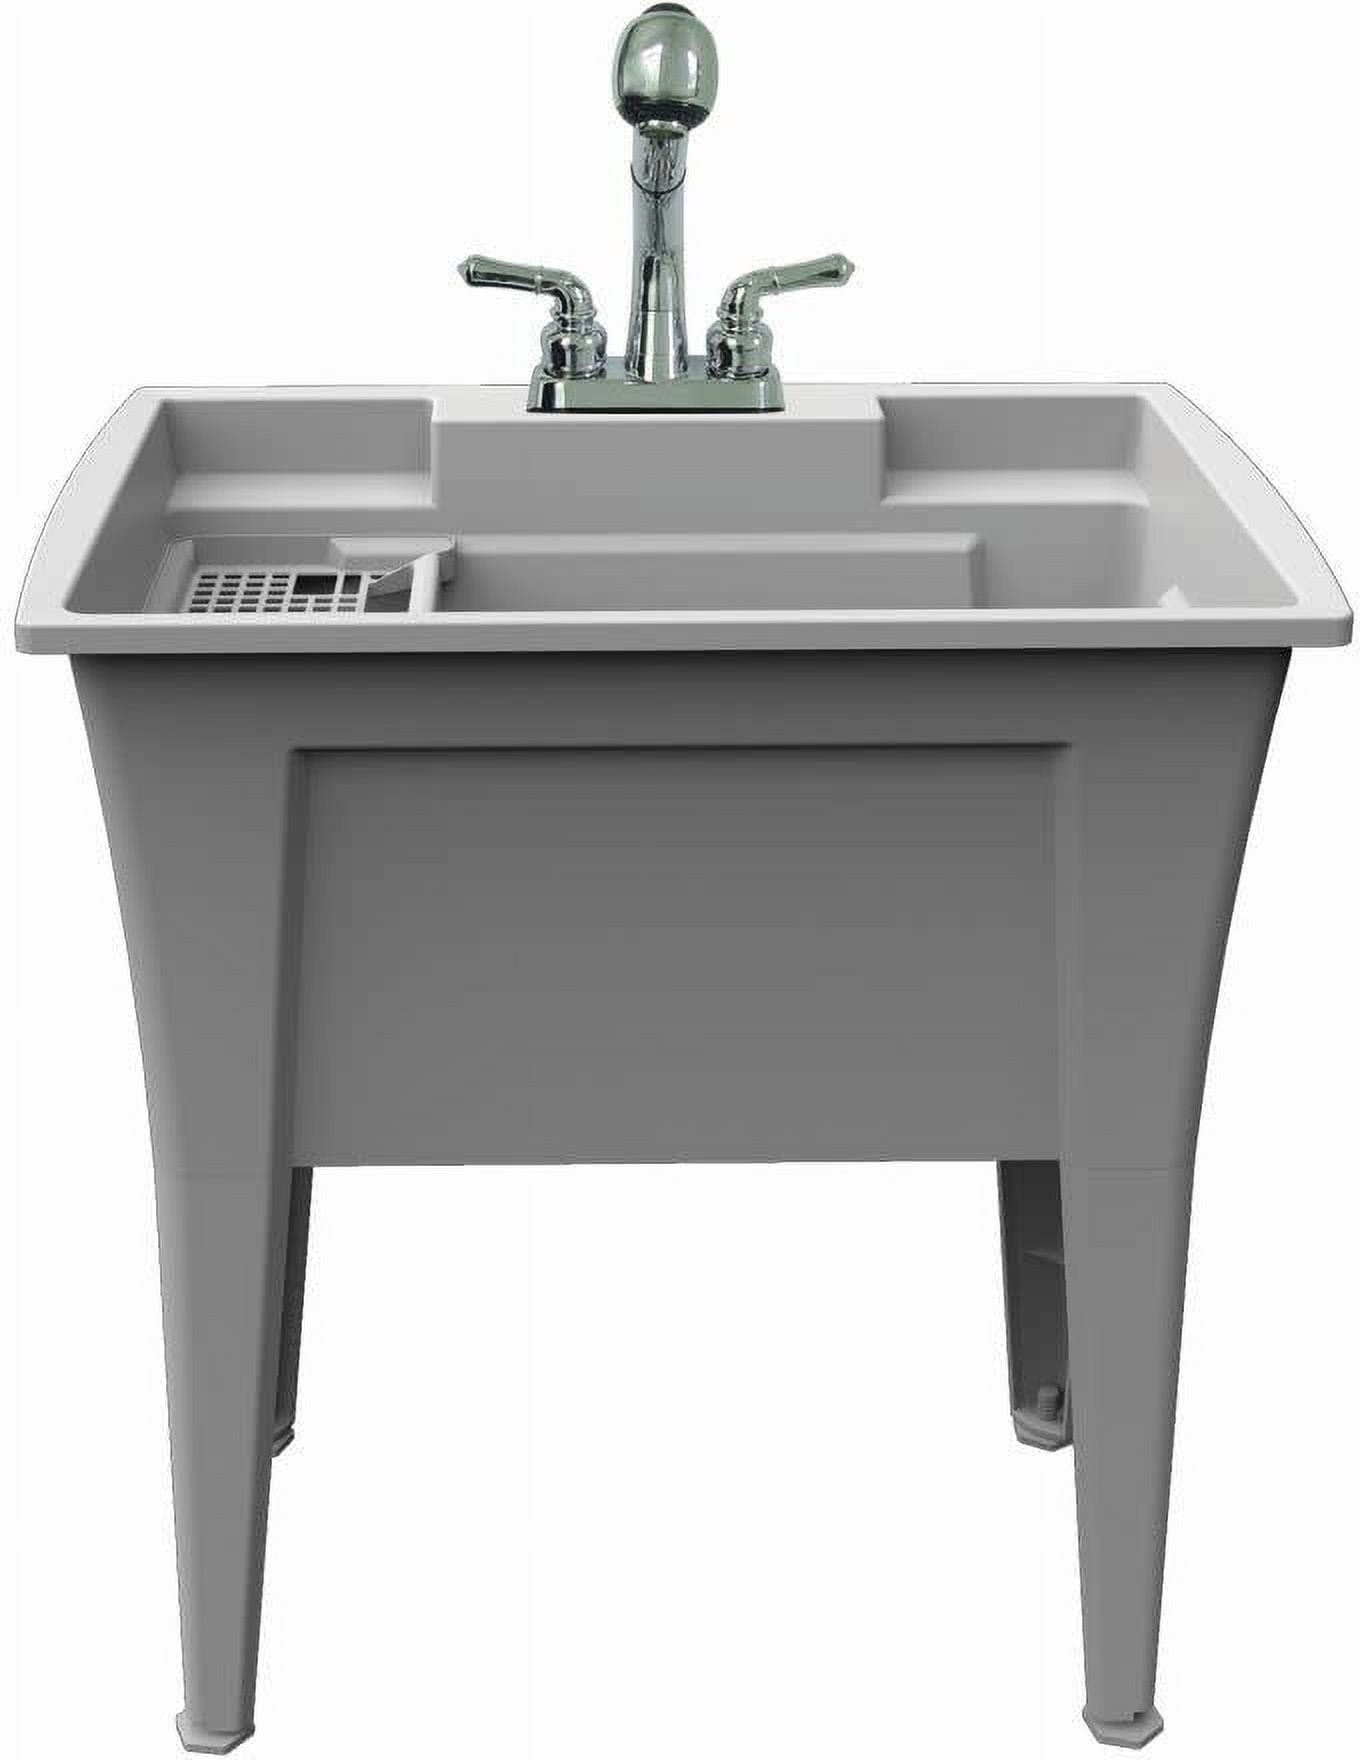 Lt-32-01 32 In. Jewel Laundry Tub Kit With Faucet